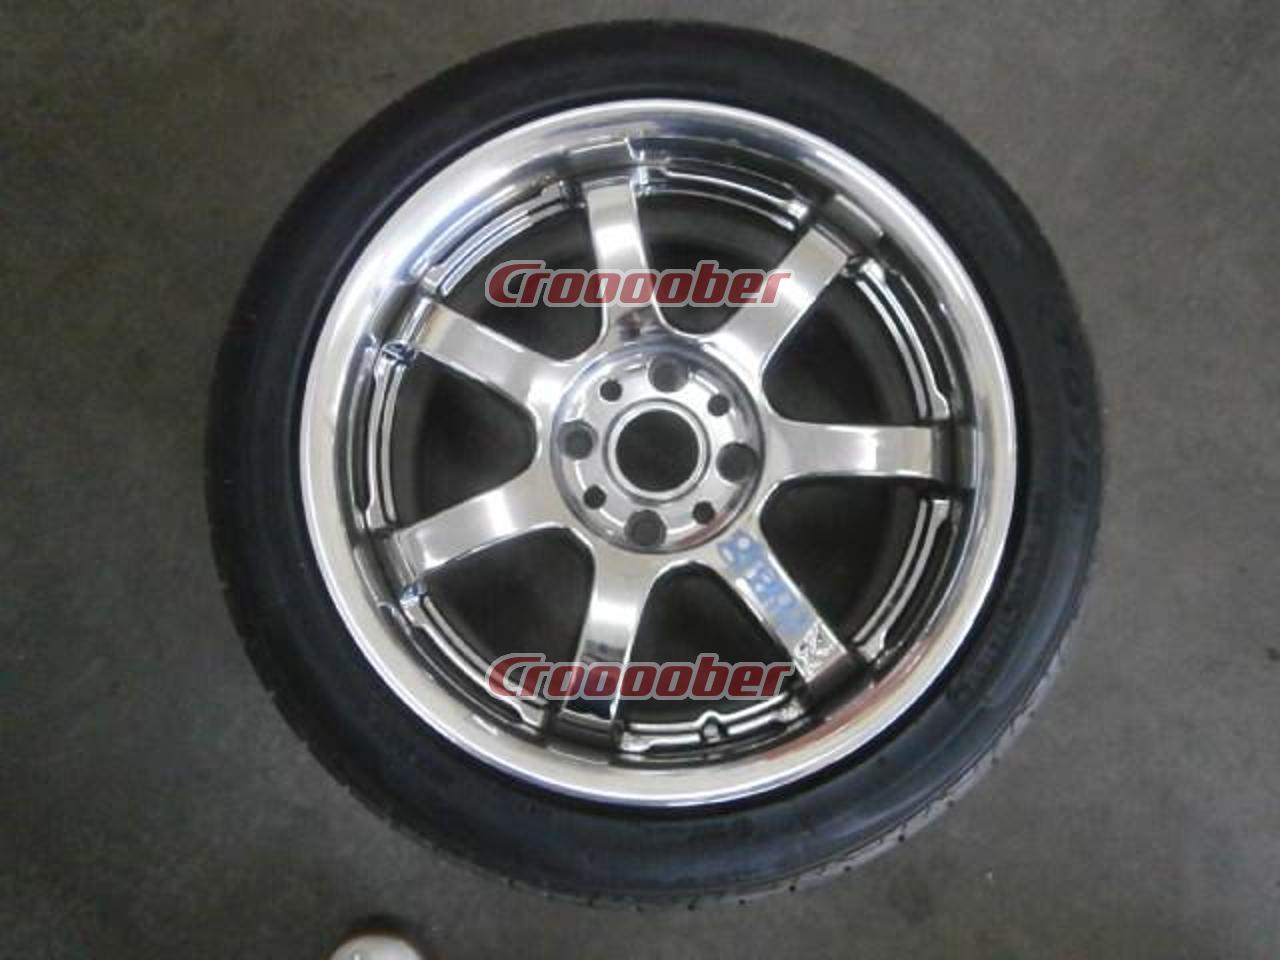 RAYS] GRAM LIGHTS 57S-PRO + TOYO DRB - Front:7.0Jx17+32  Rear:8.0Jx17+22114.3-4H for Sale | Croooober